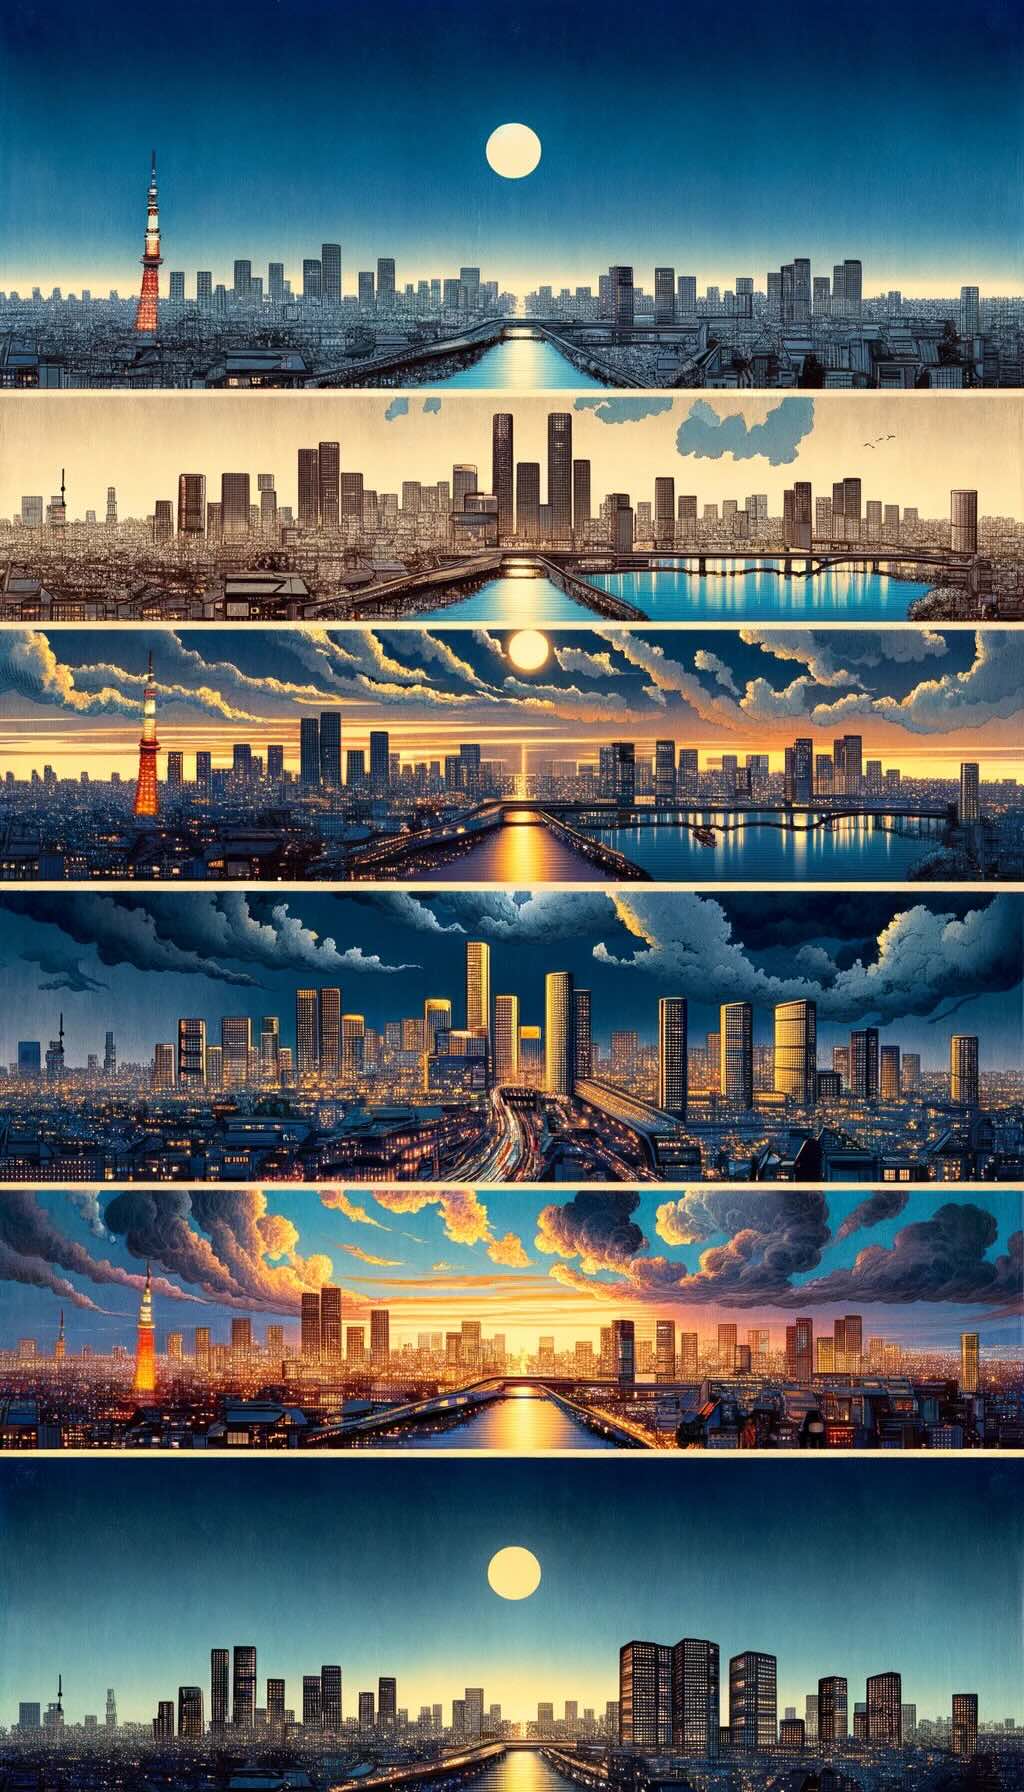 Visual guide for the best viewing experience of Tokyo's skyline depicts the city at different times of the day, capturing the changing ambiance from clear daytime views to the serene twilight and the vibrant energy of the night. The piece subtly incorporates elements like cameras and tripods, symbolizing photography tips and considerations for timing and weather.